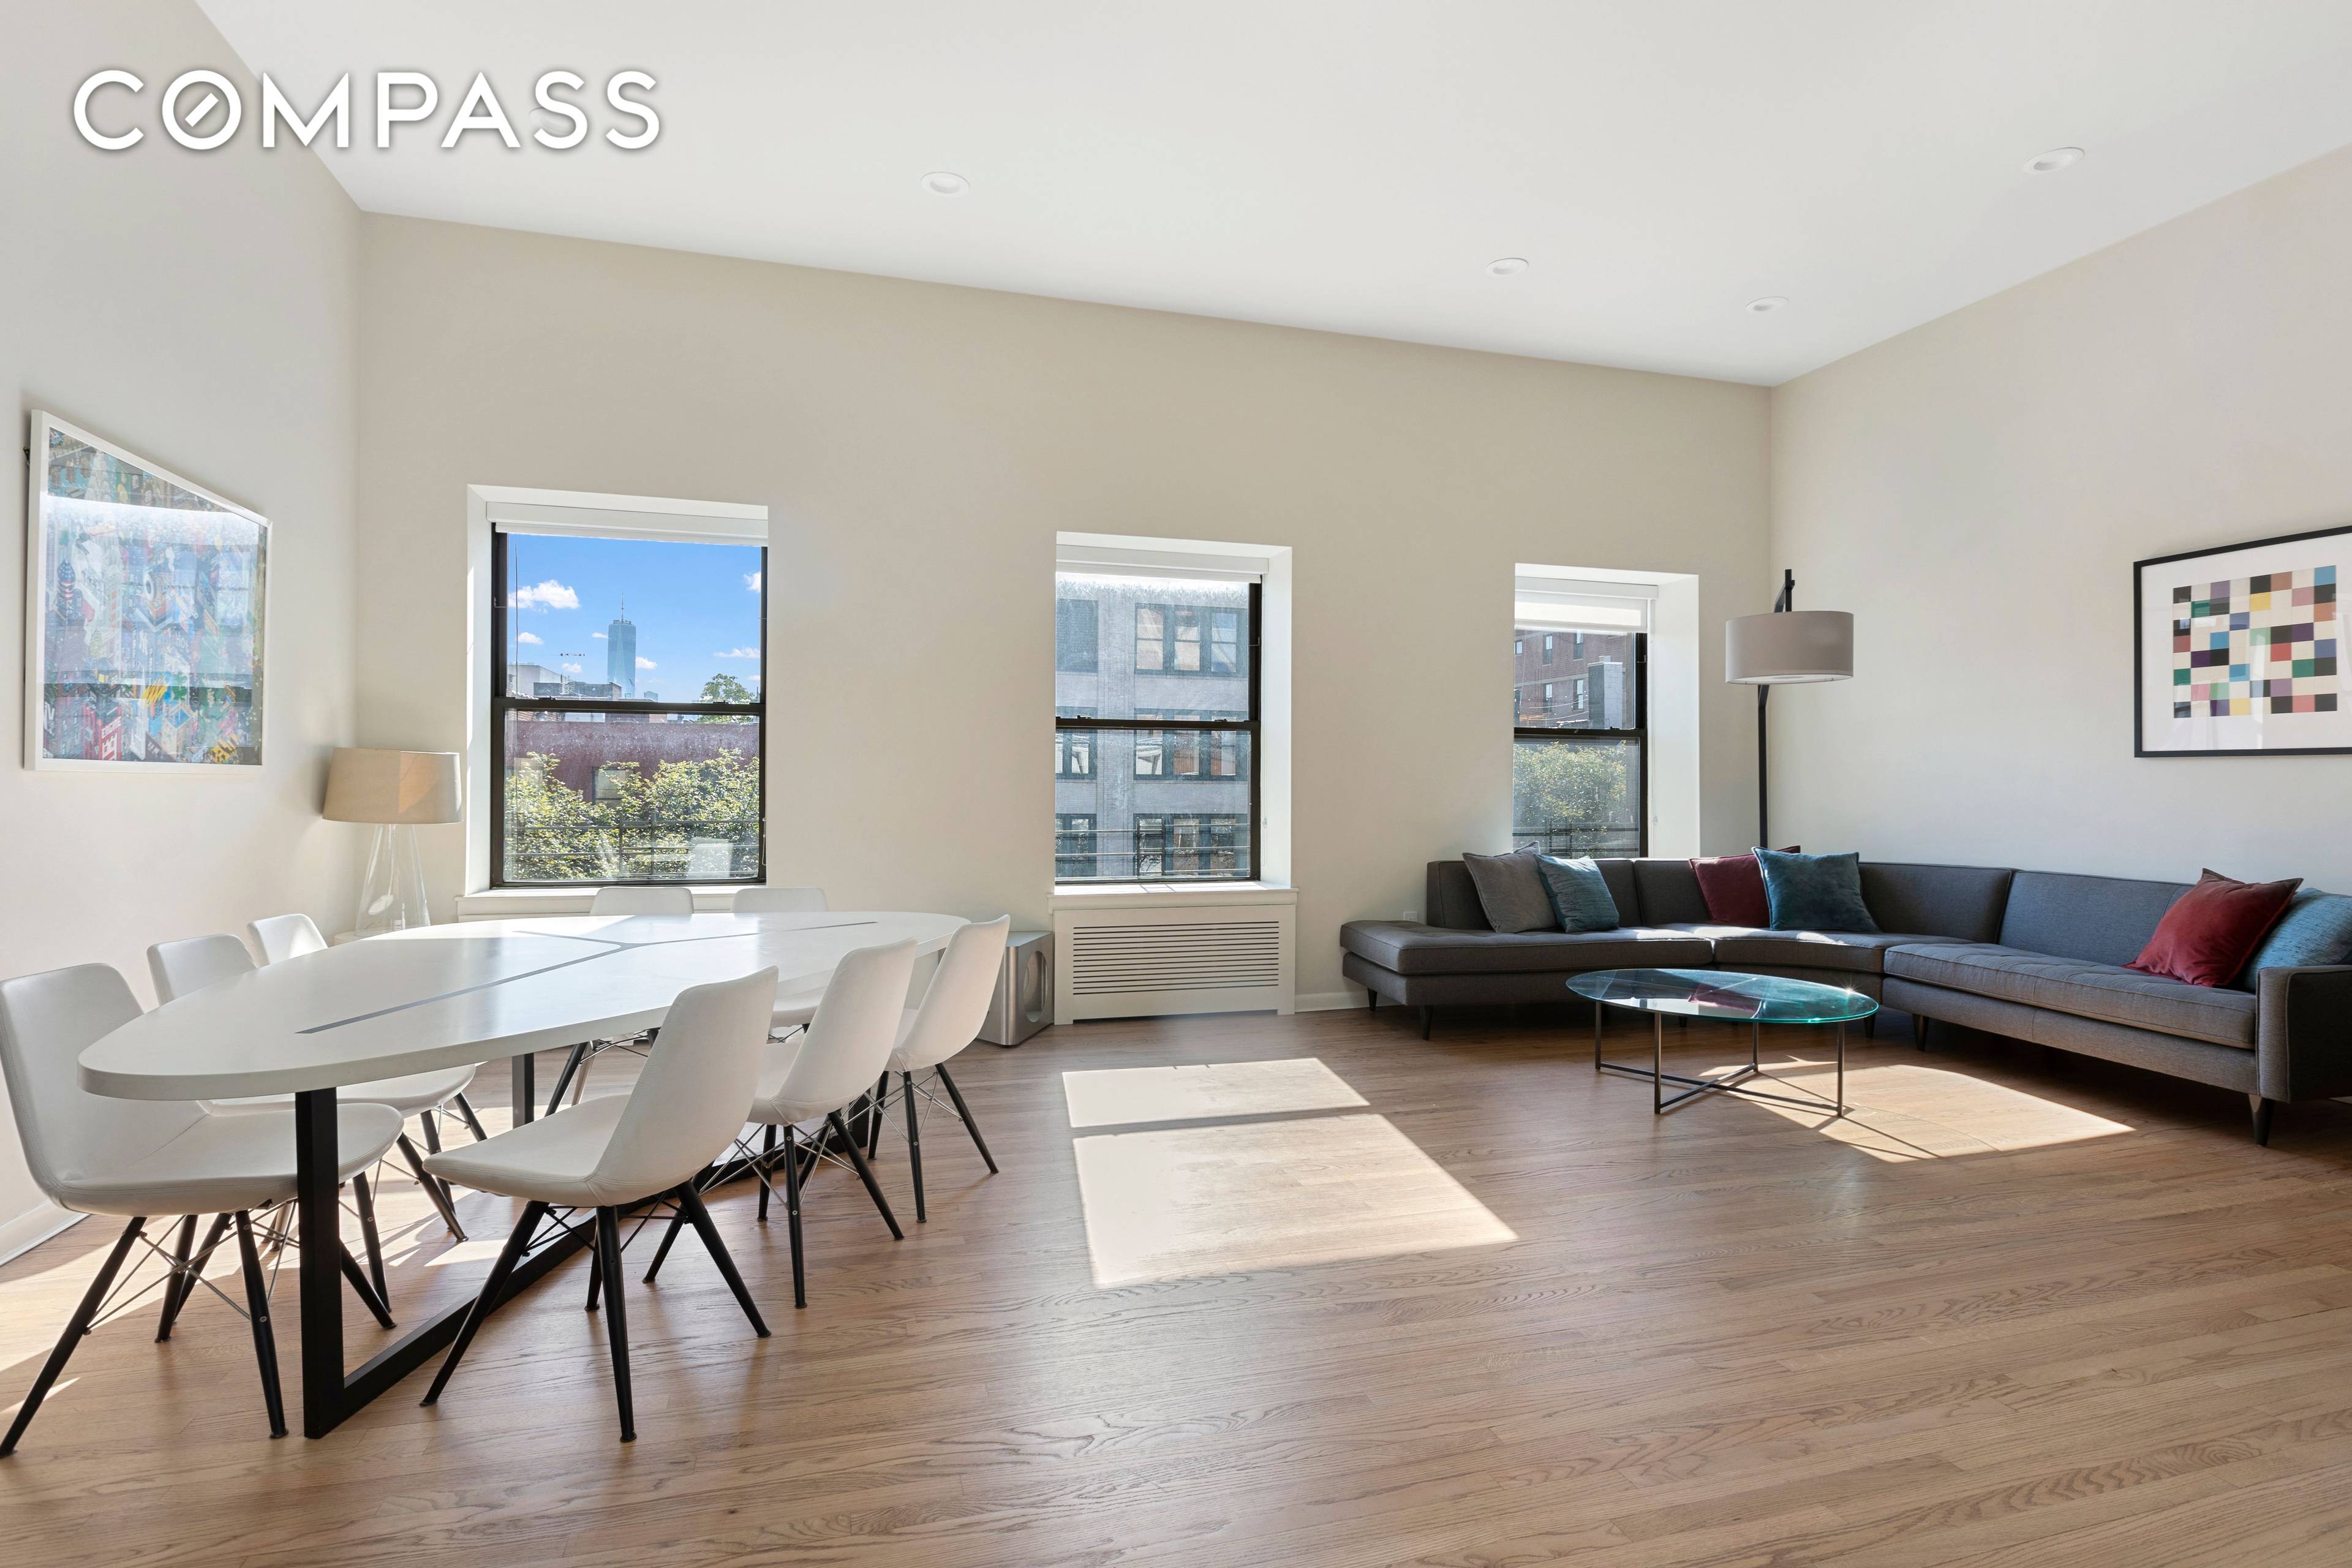 This rare top floor south facing loft like two bedroom duplex is flooded with sunlight and located in an intimate 9 unit converted brownstone condominium.